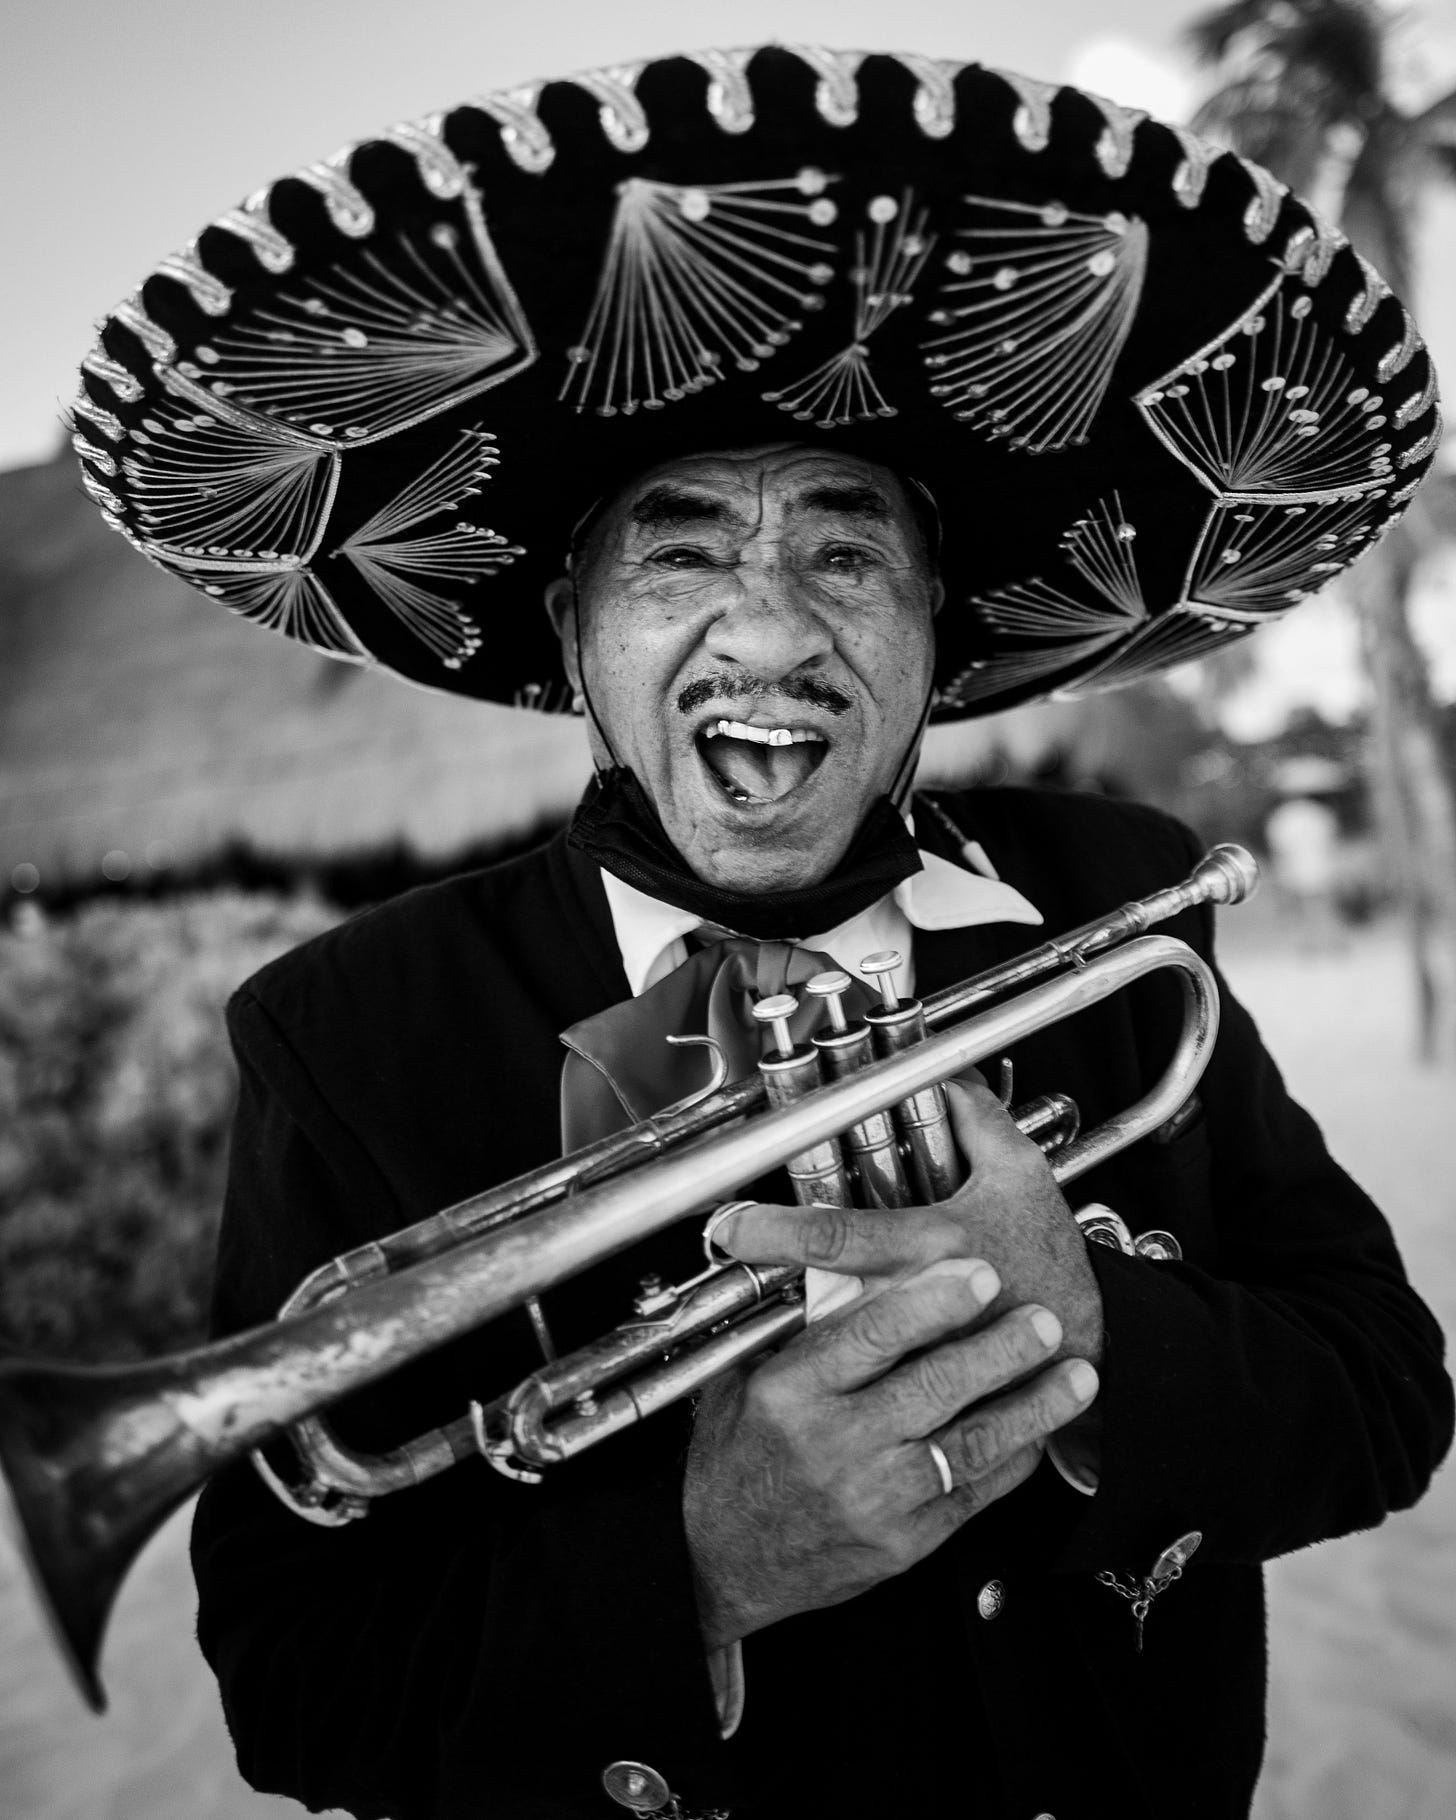 Close of a mariachi musician in black and white, holding a trumpet with an open mouth and an emotional or surprised look on his face.